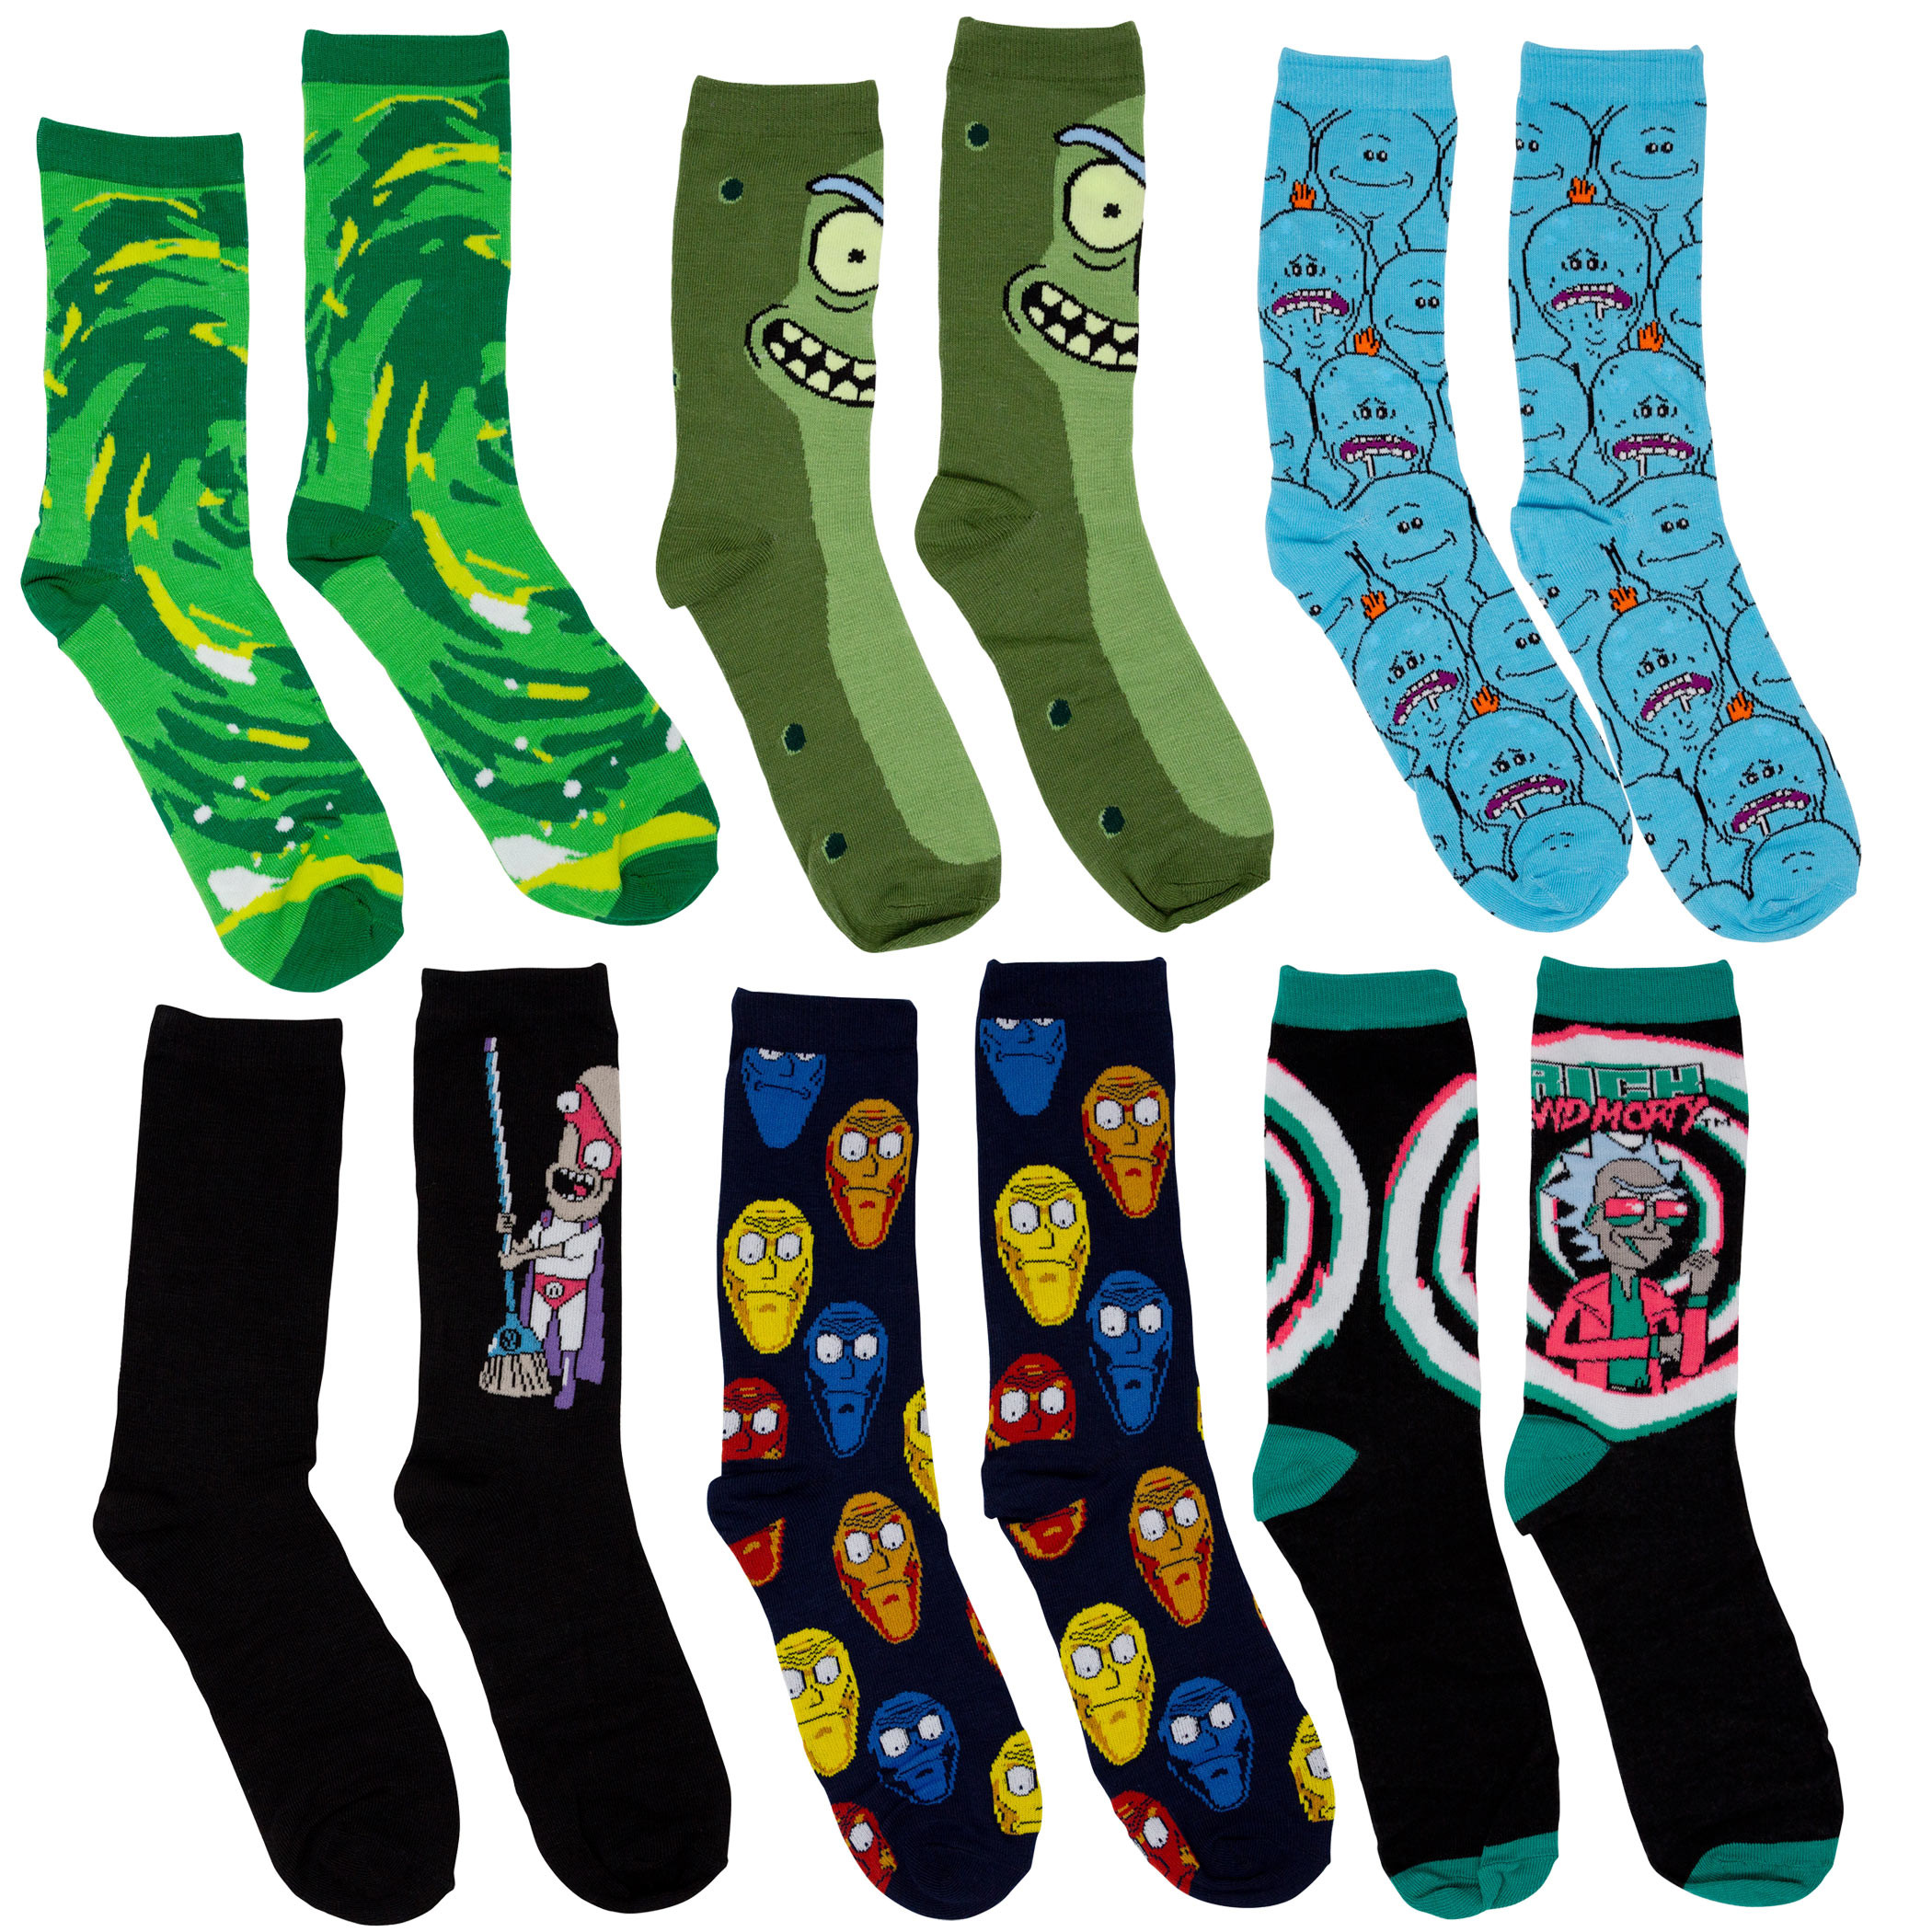 Rick and Morty 12-Pair Pack of Socks Gift Giving Box